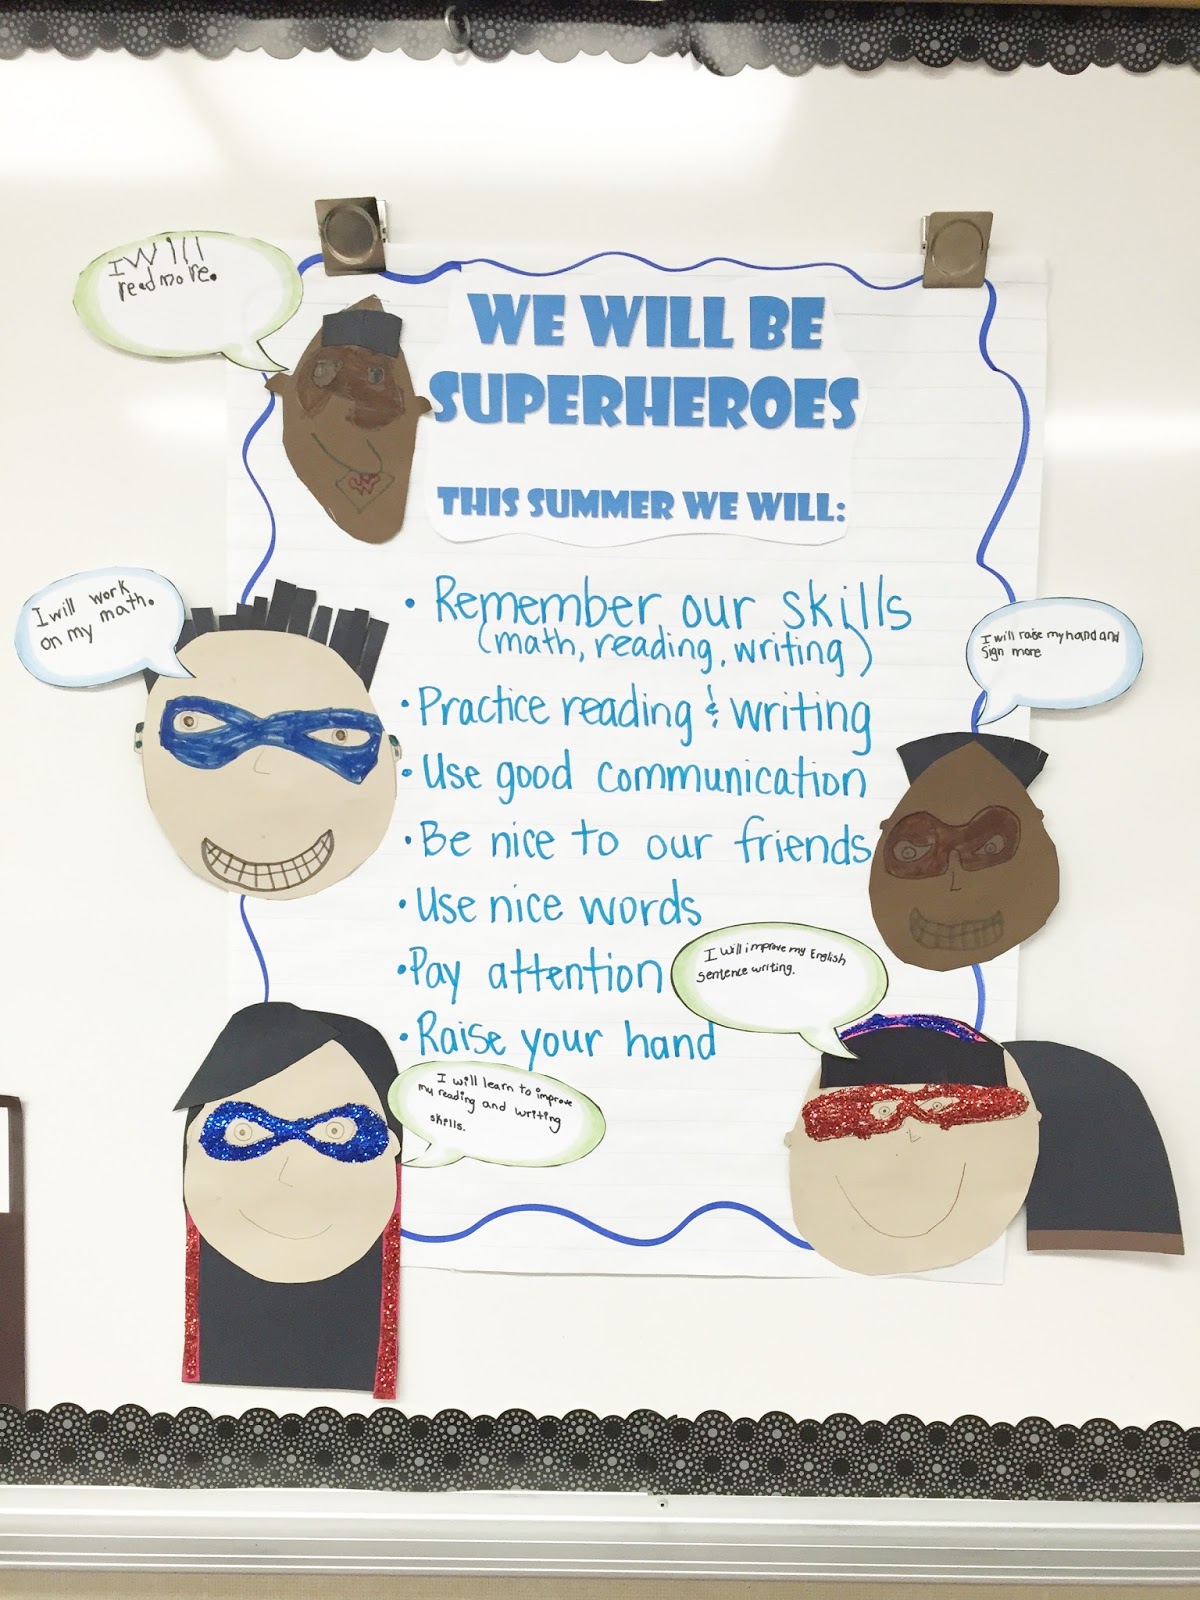 Super heroes - Improve your English